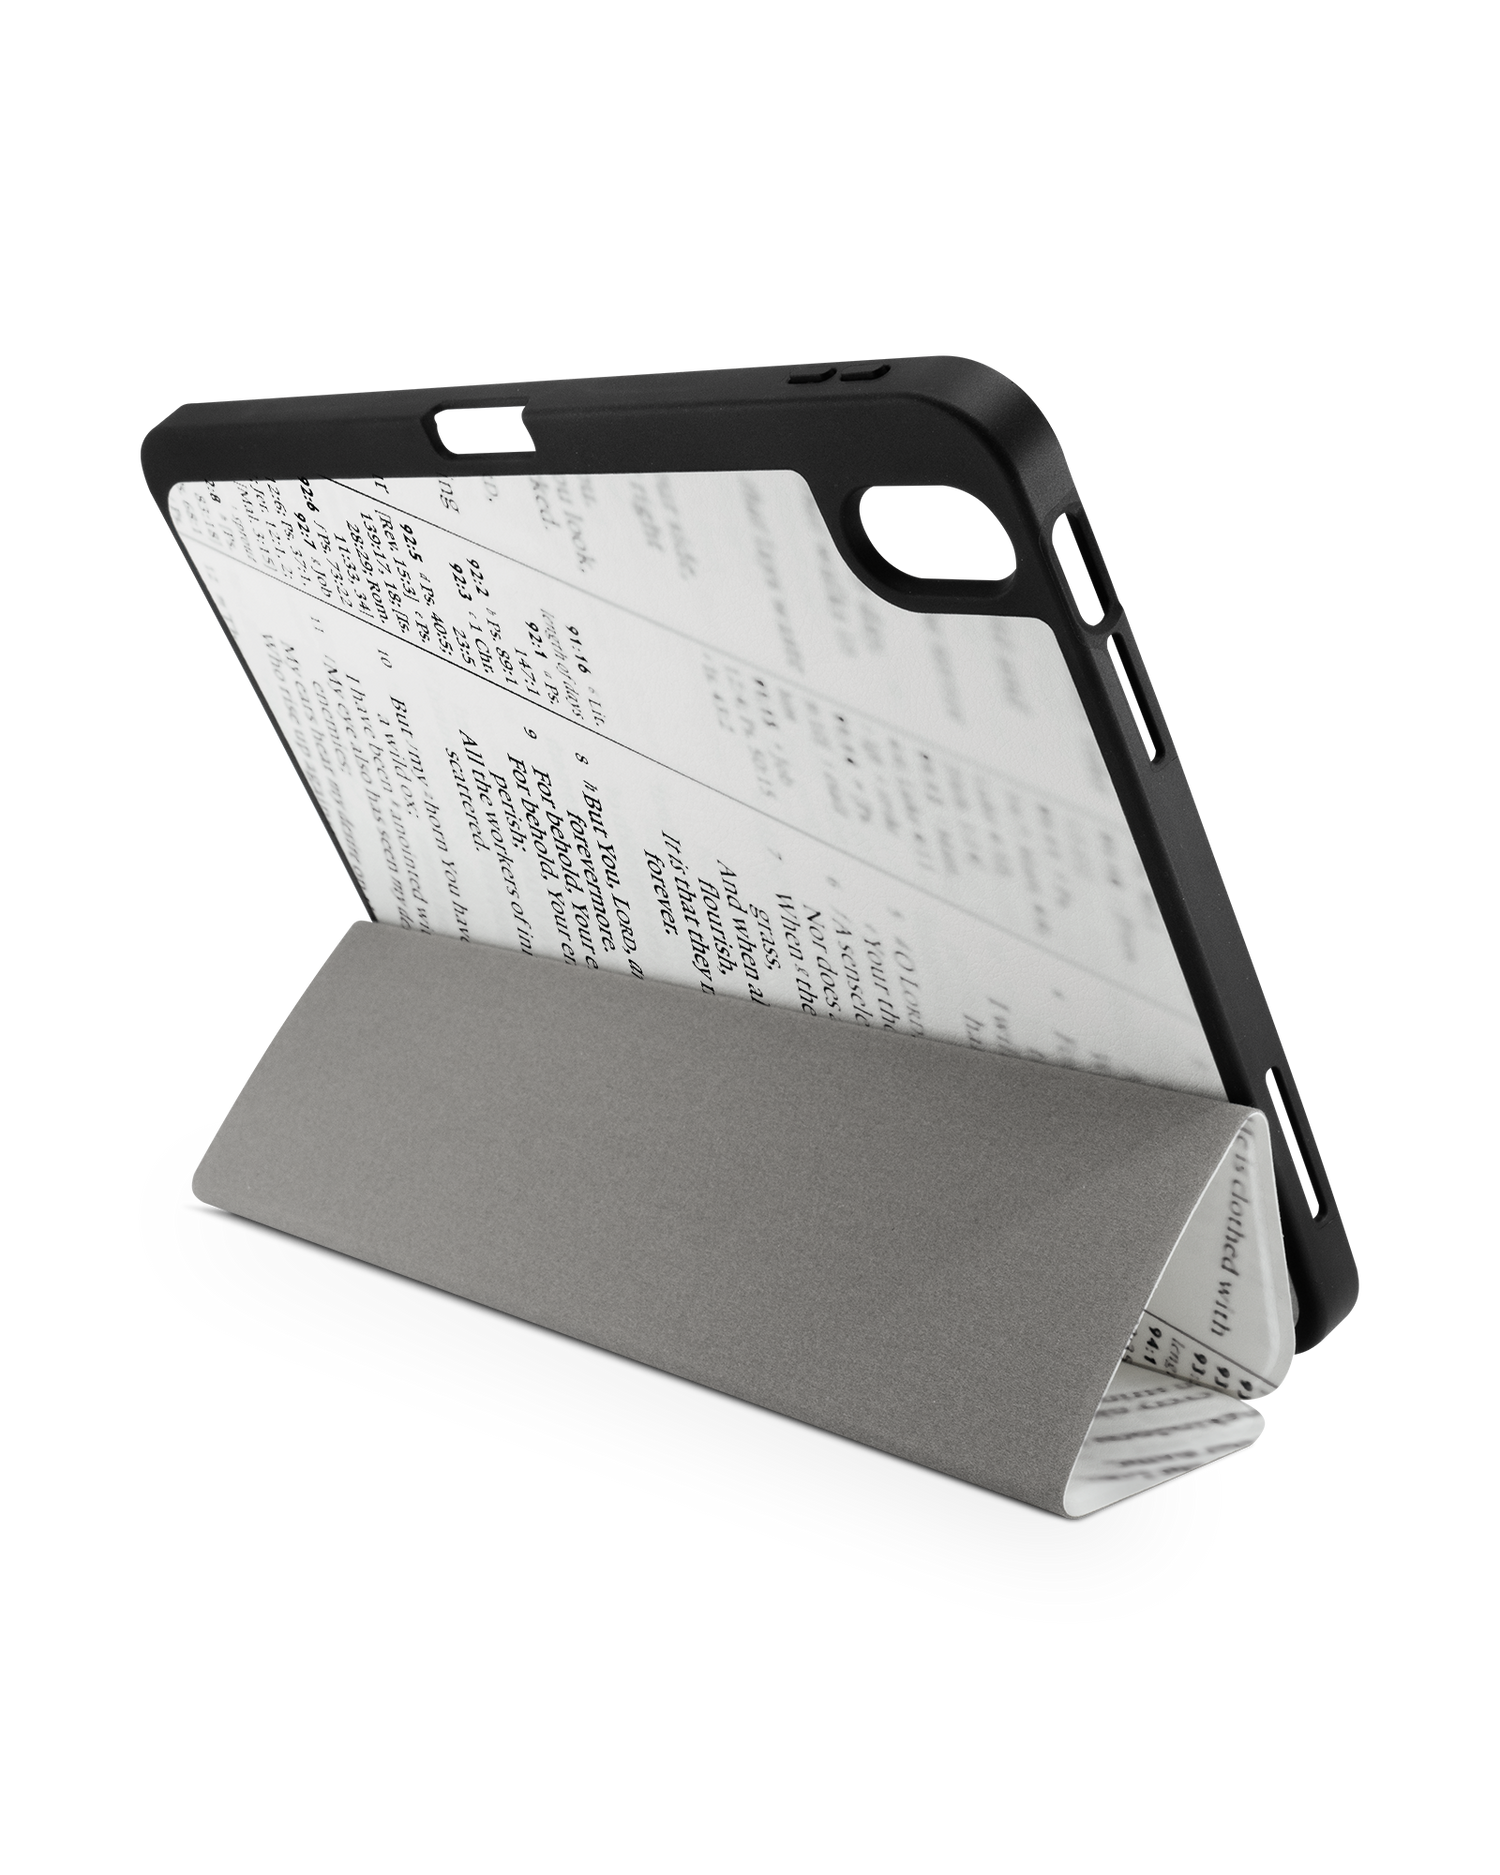 Bible Verse iPad Case with Pencil Holder for Apple iPad (10th Generation): Set up in landscape format (back view)